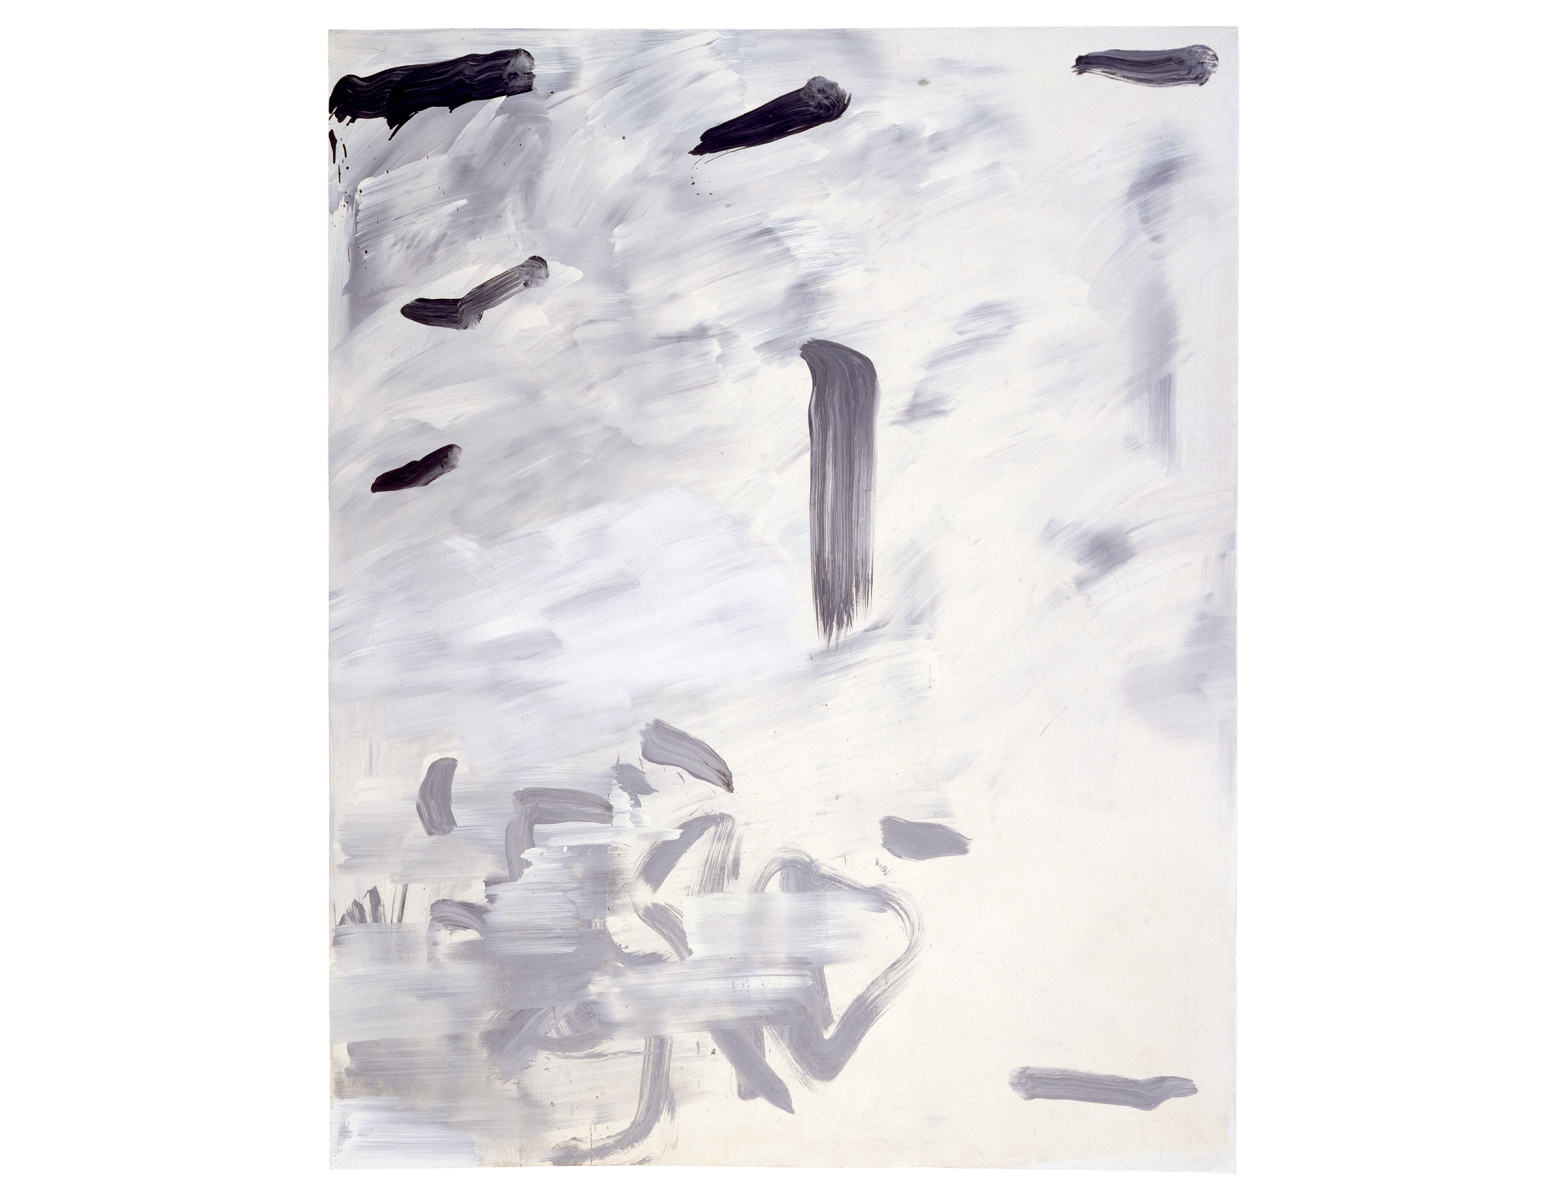 From an Island-20004, 2000, Oil on Canvas, 227.3x181.8cm
